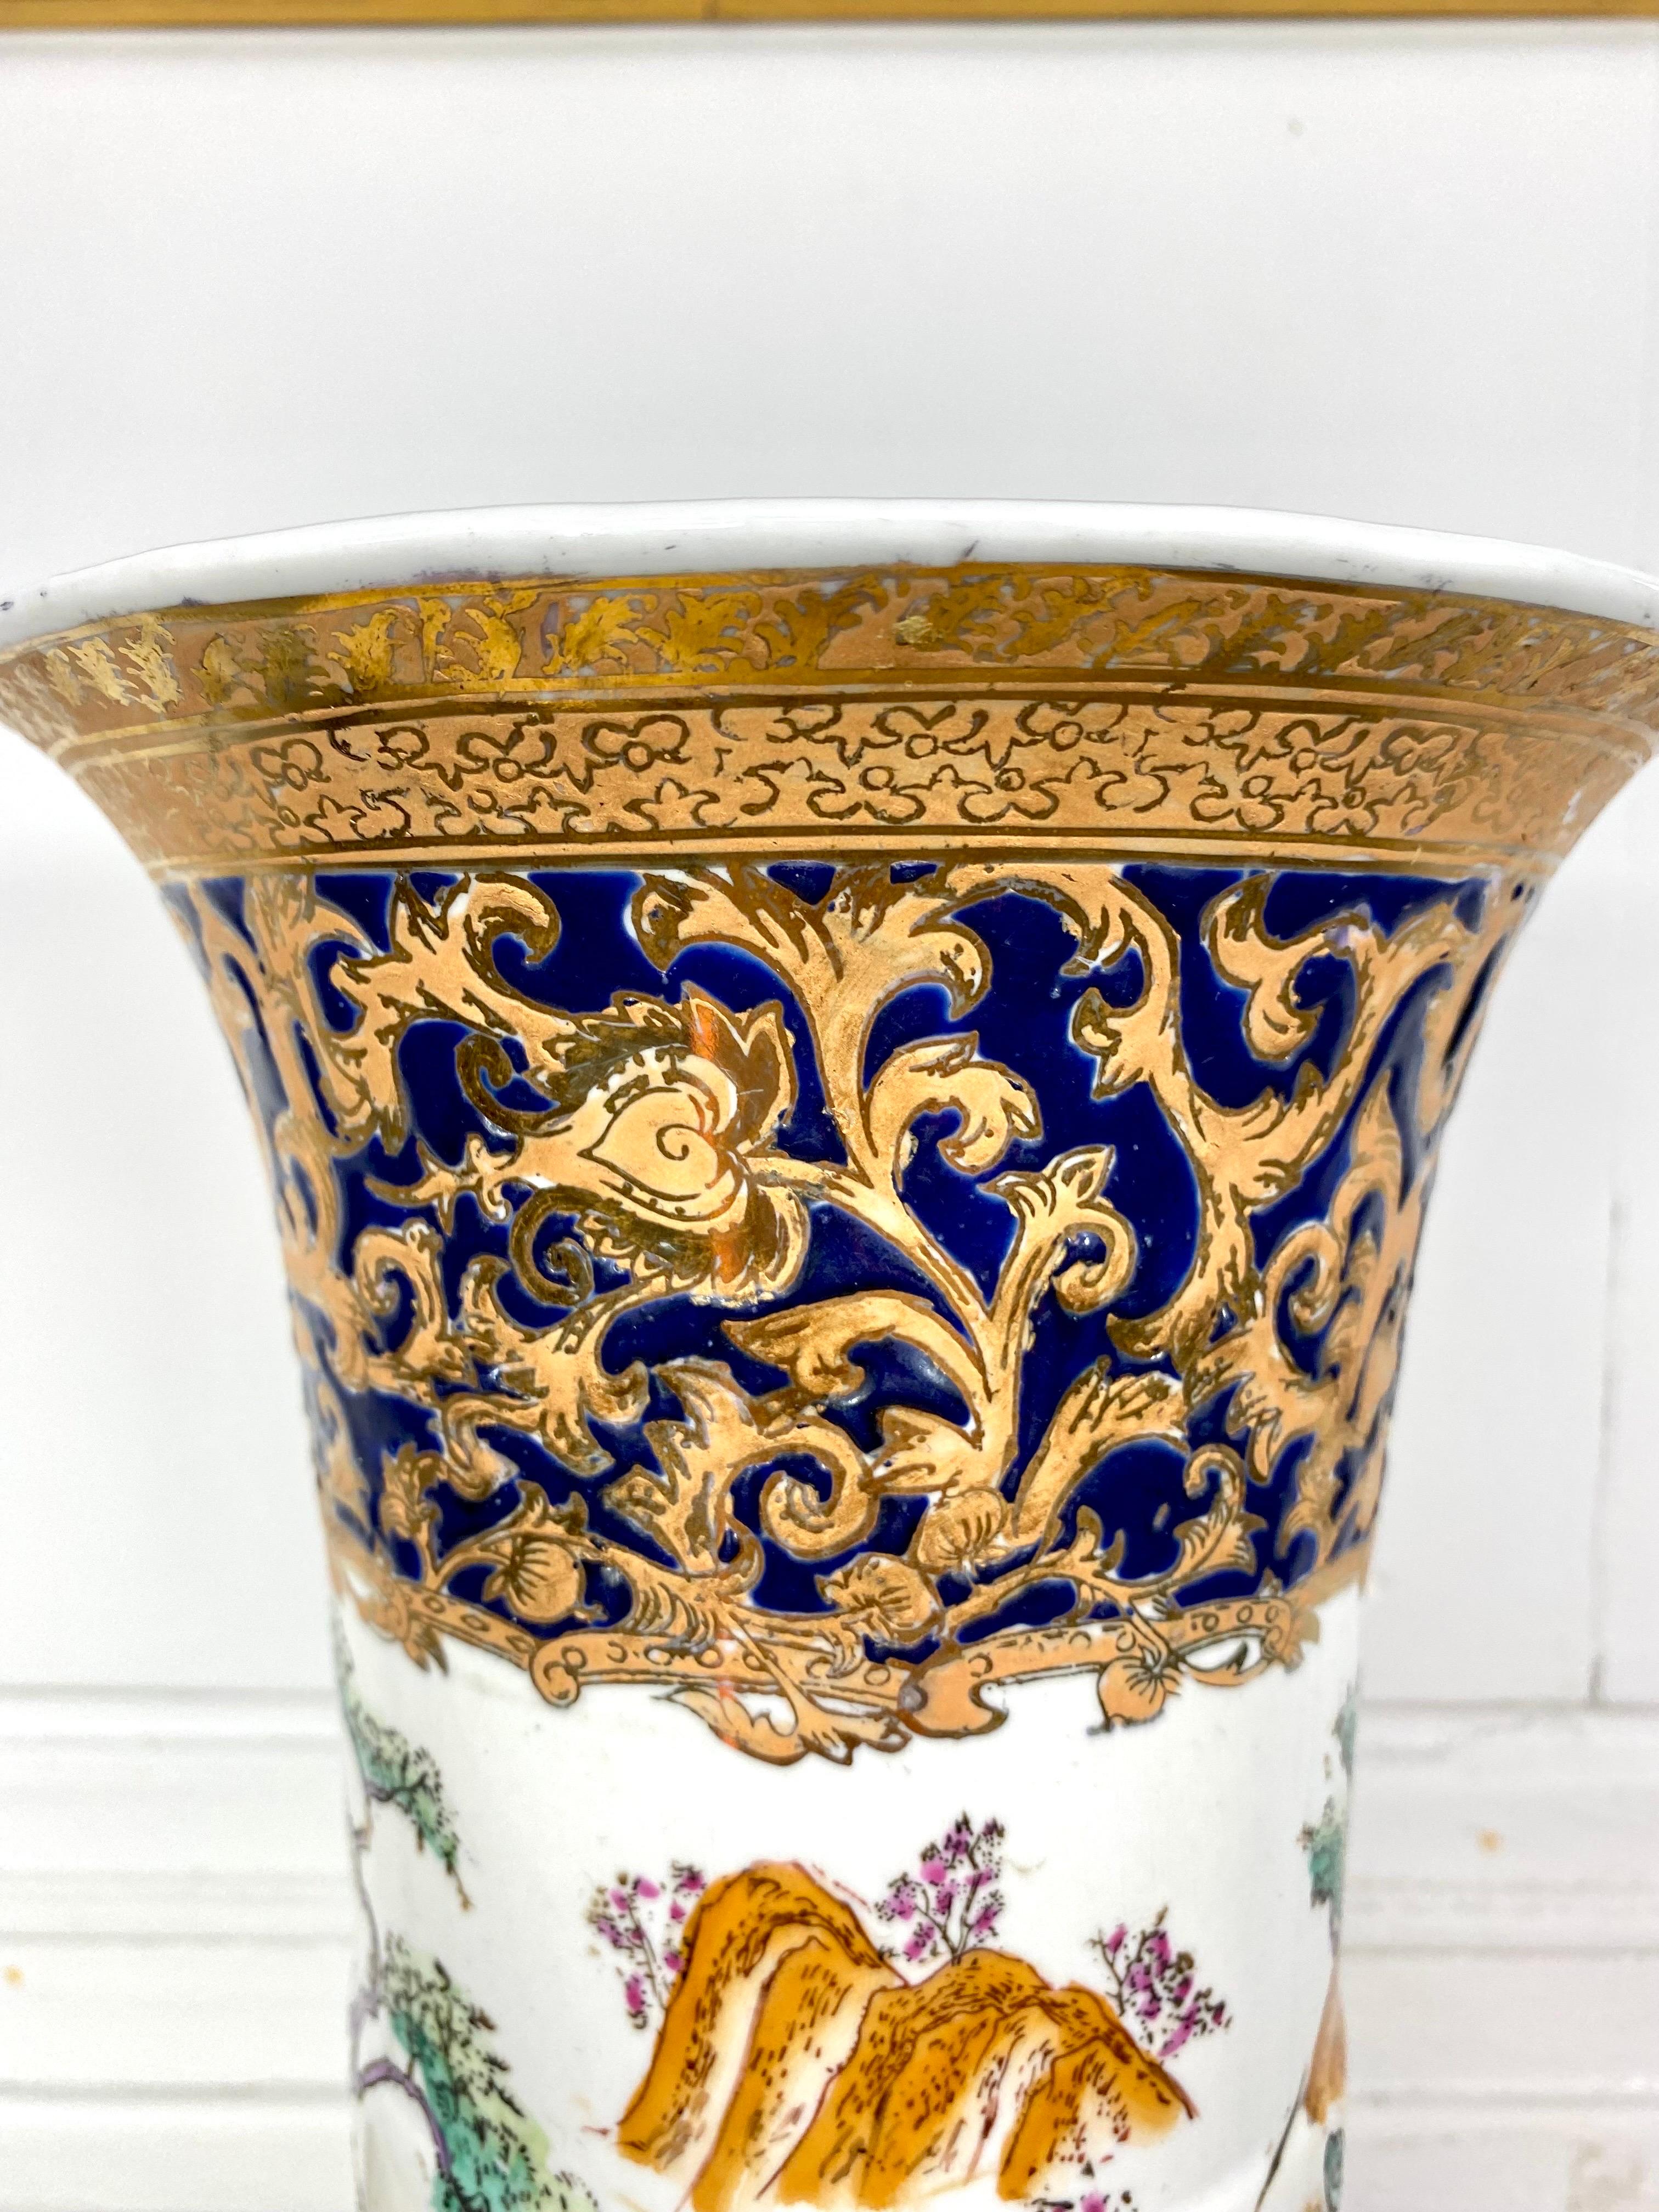 Compagnie Des Indes Porcelain Cornet Vase with Hunting Scene 19th Century, China 4